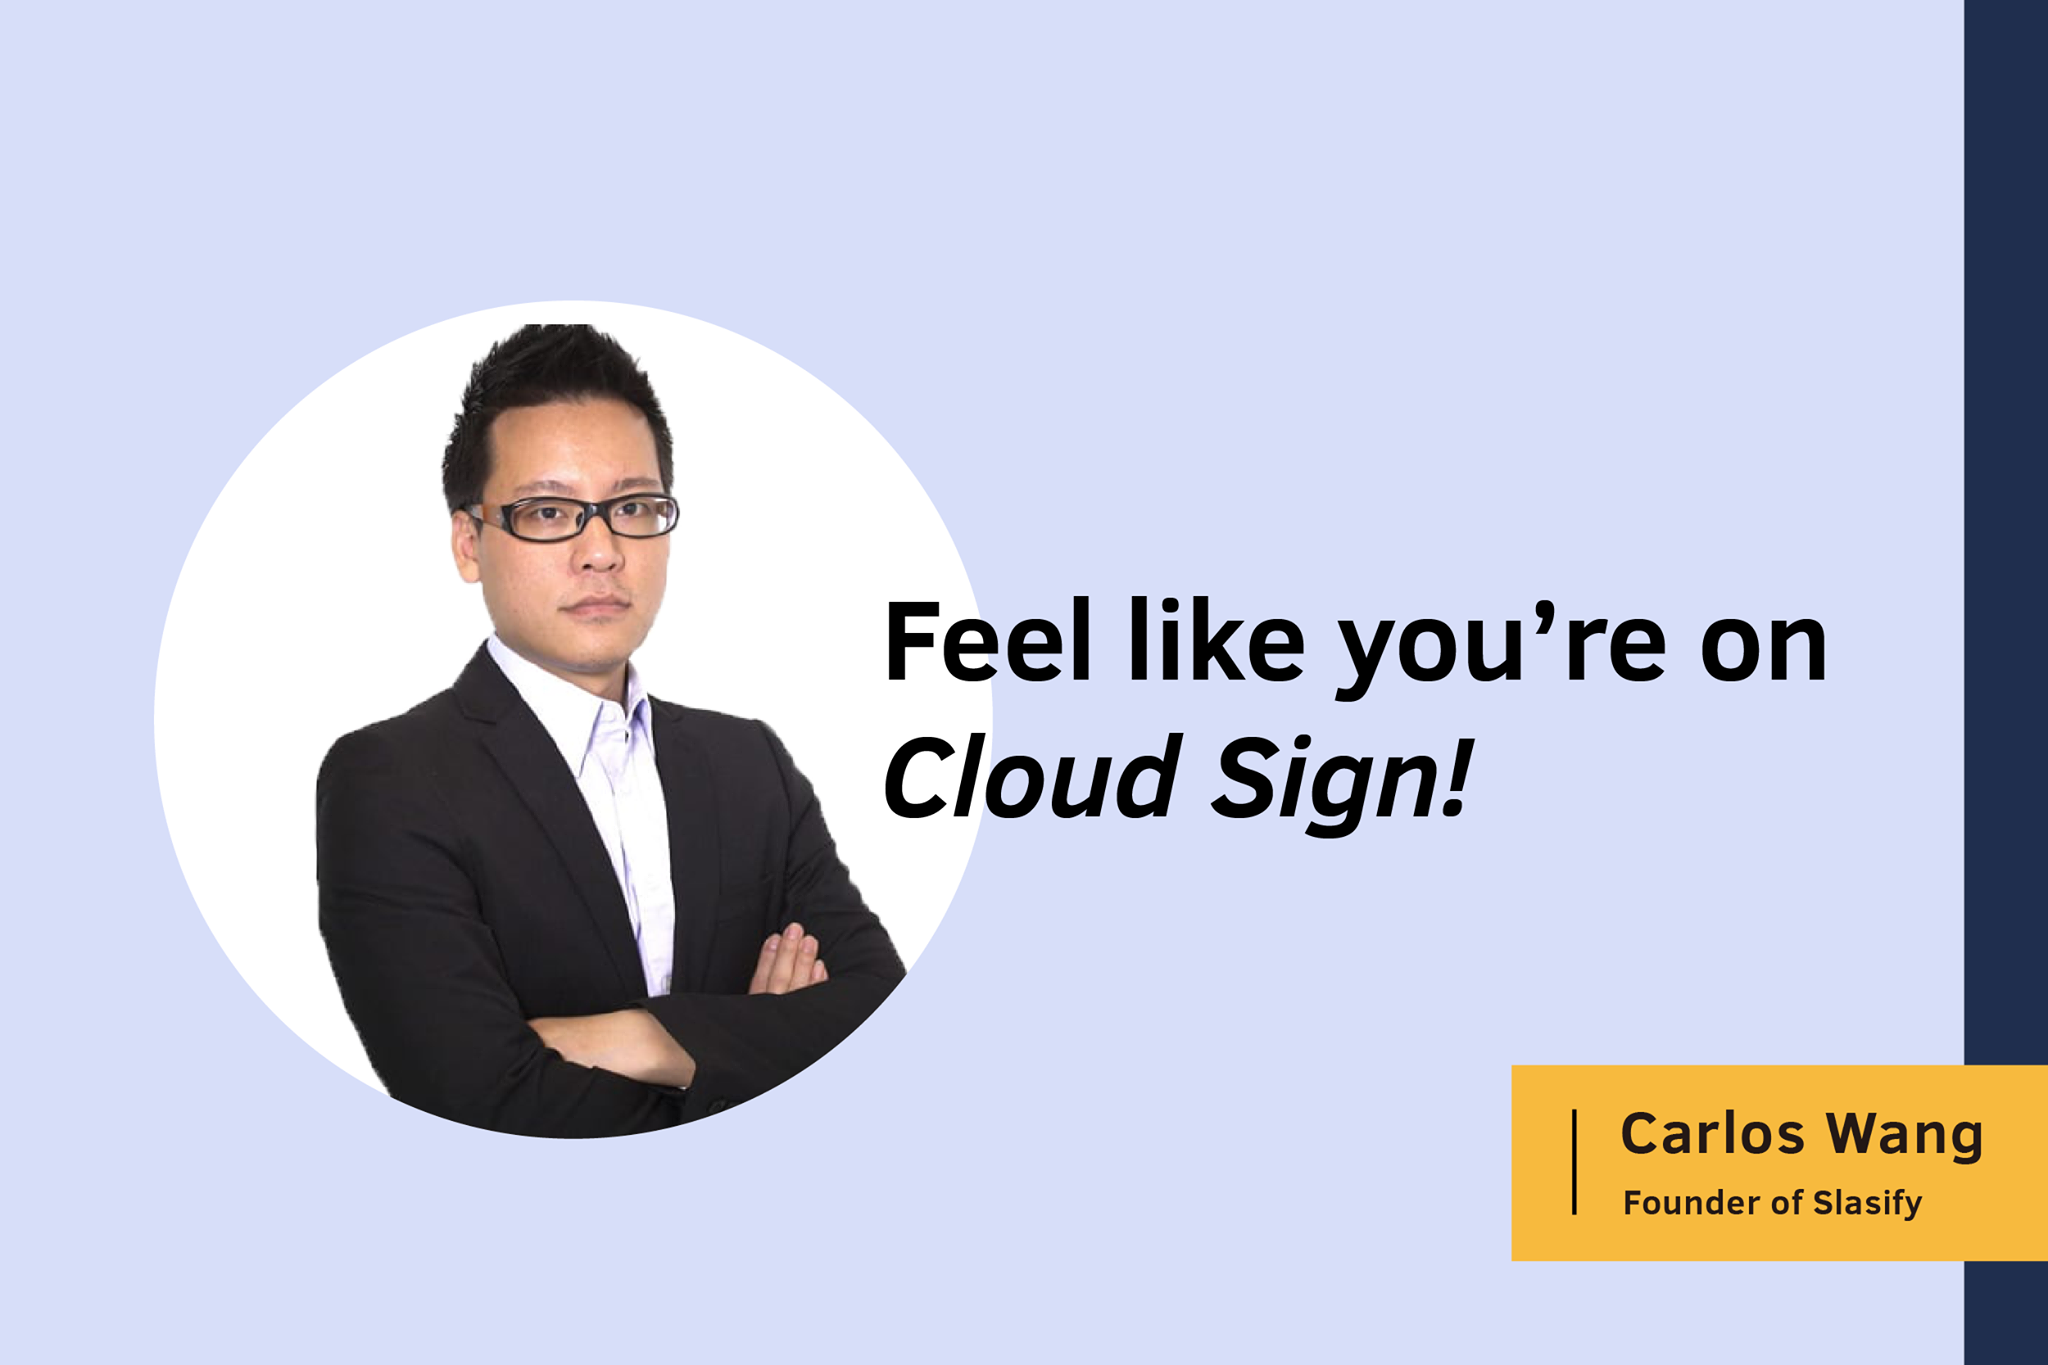 Slasify uses DottedSign to accelerate the signing workflow.